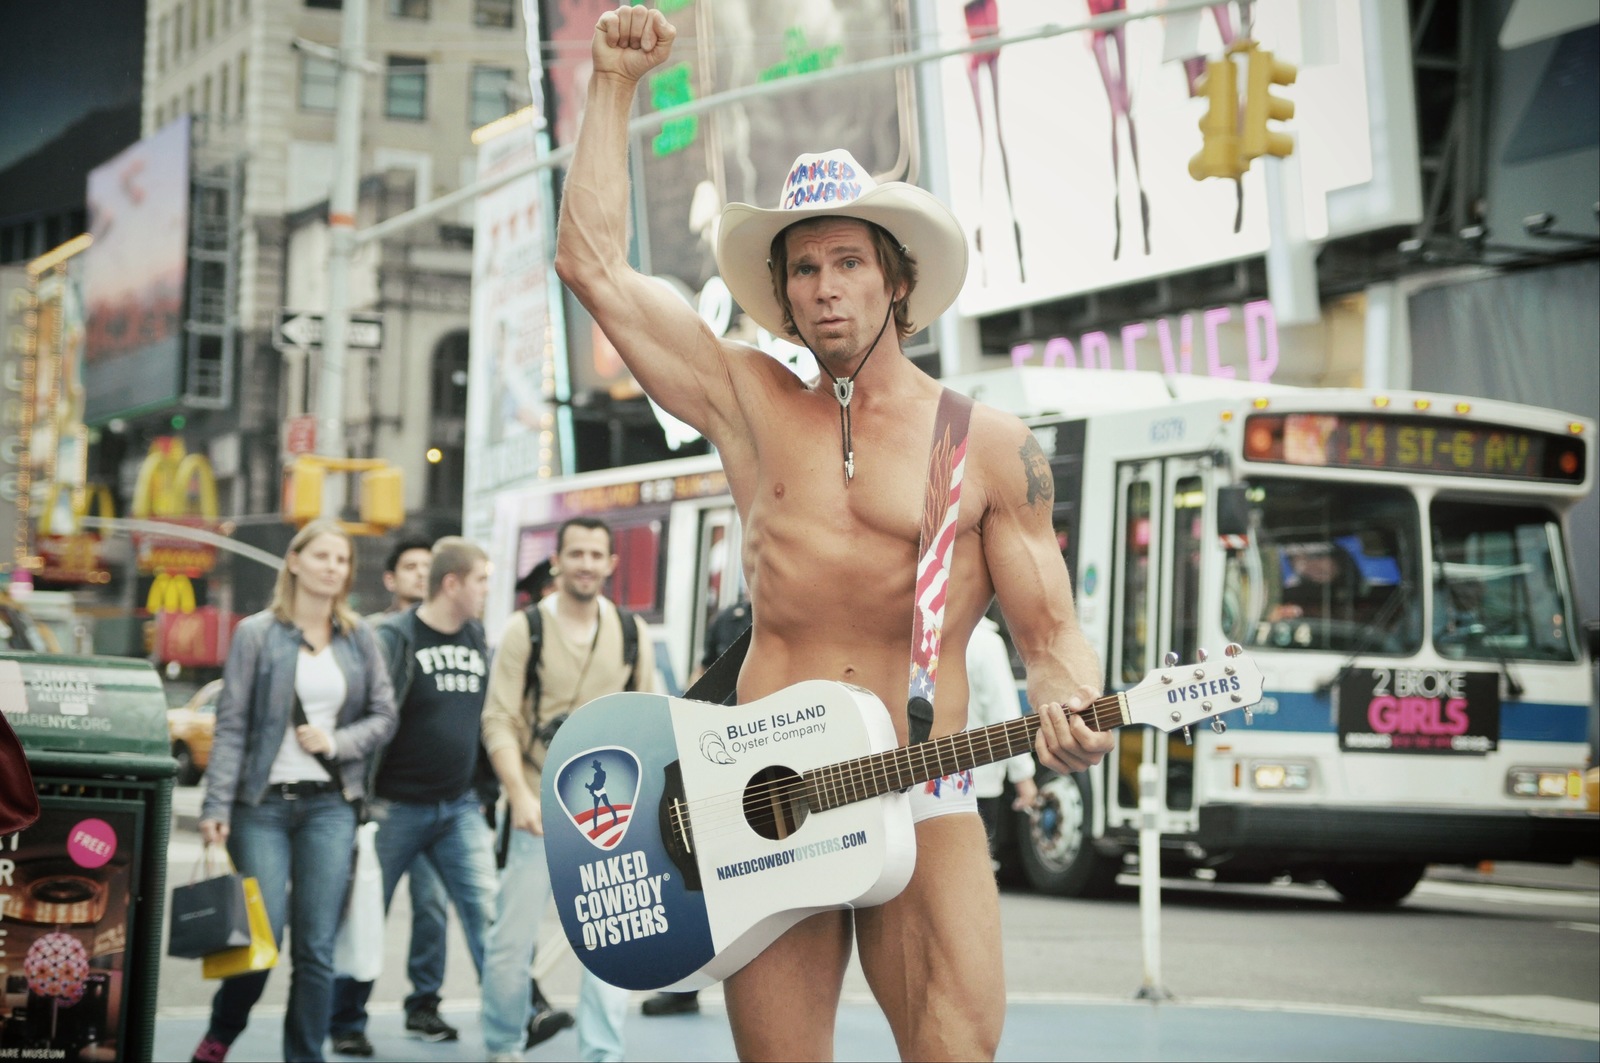 Naked cowboy of times square